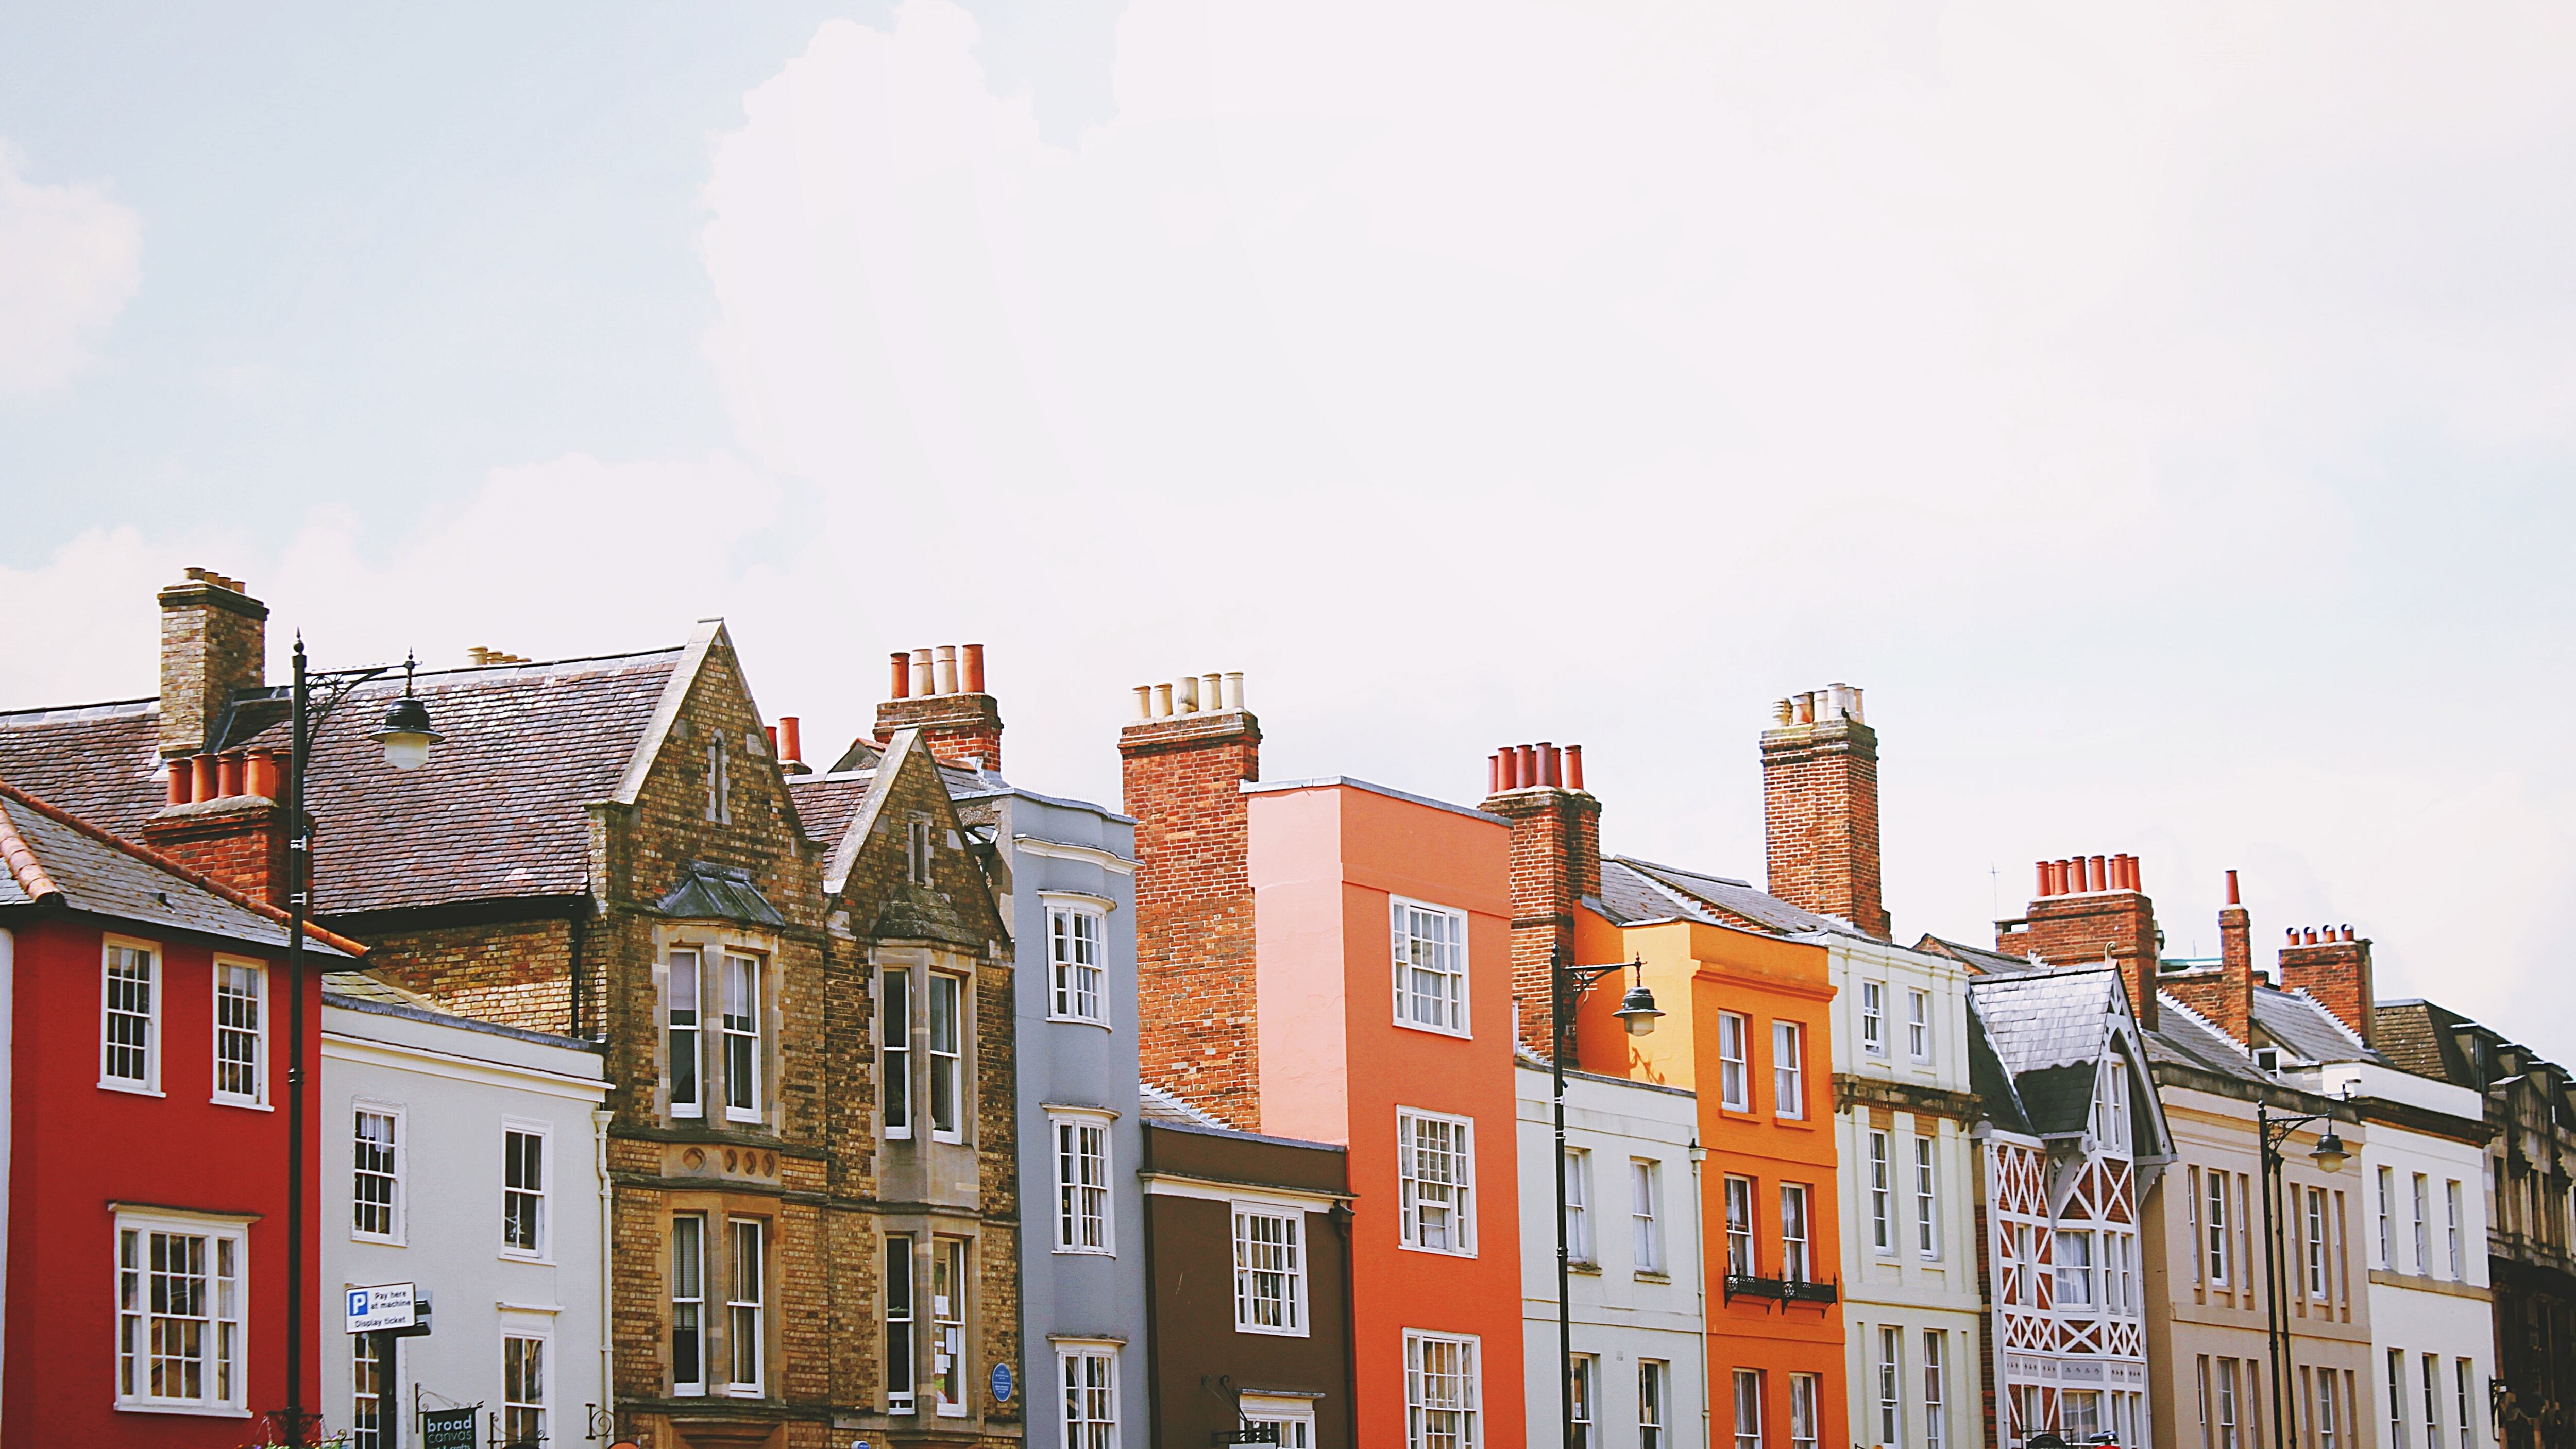 Rishi Sunak, the UK prime minister, has announced his government will scrap or delay a number of measures designed to help the UK reach net zero by 2050, with a particular focus on housing.